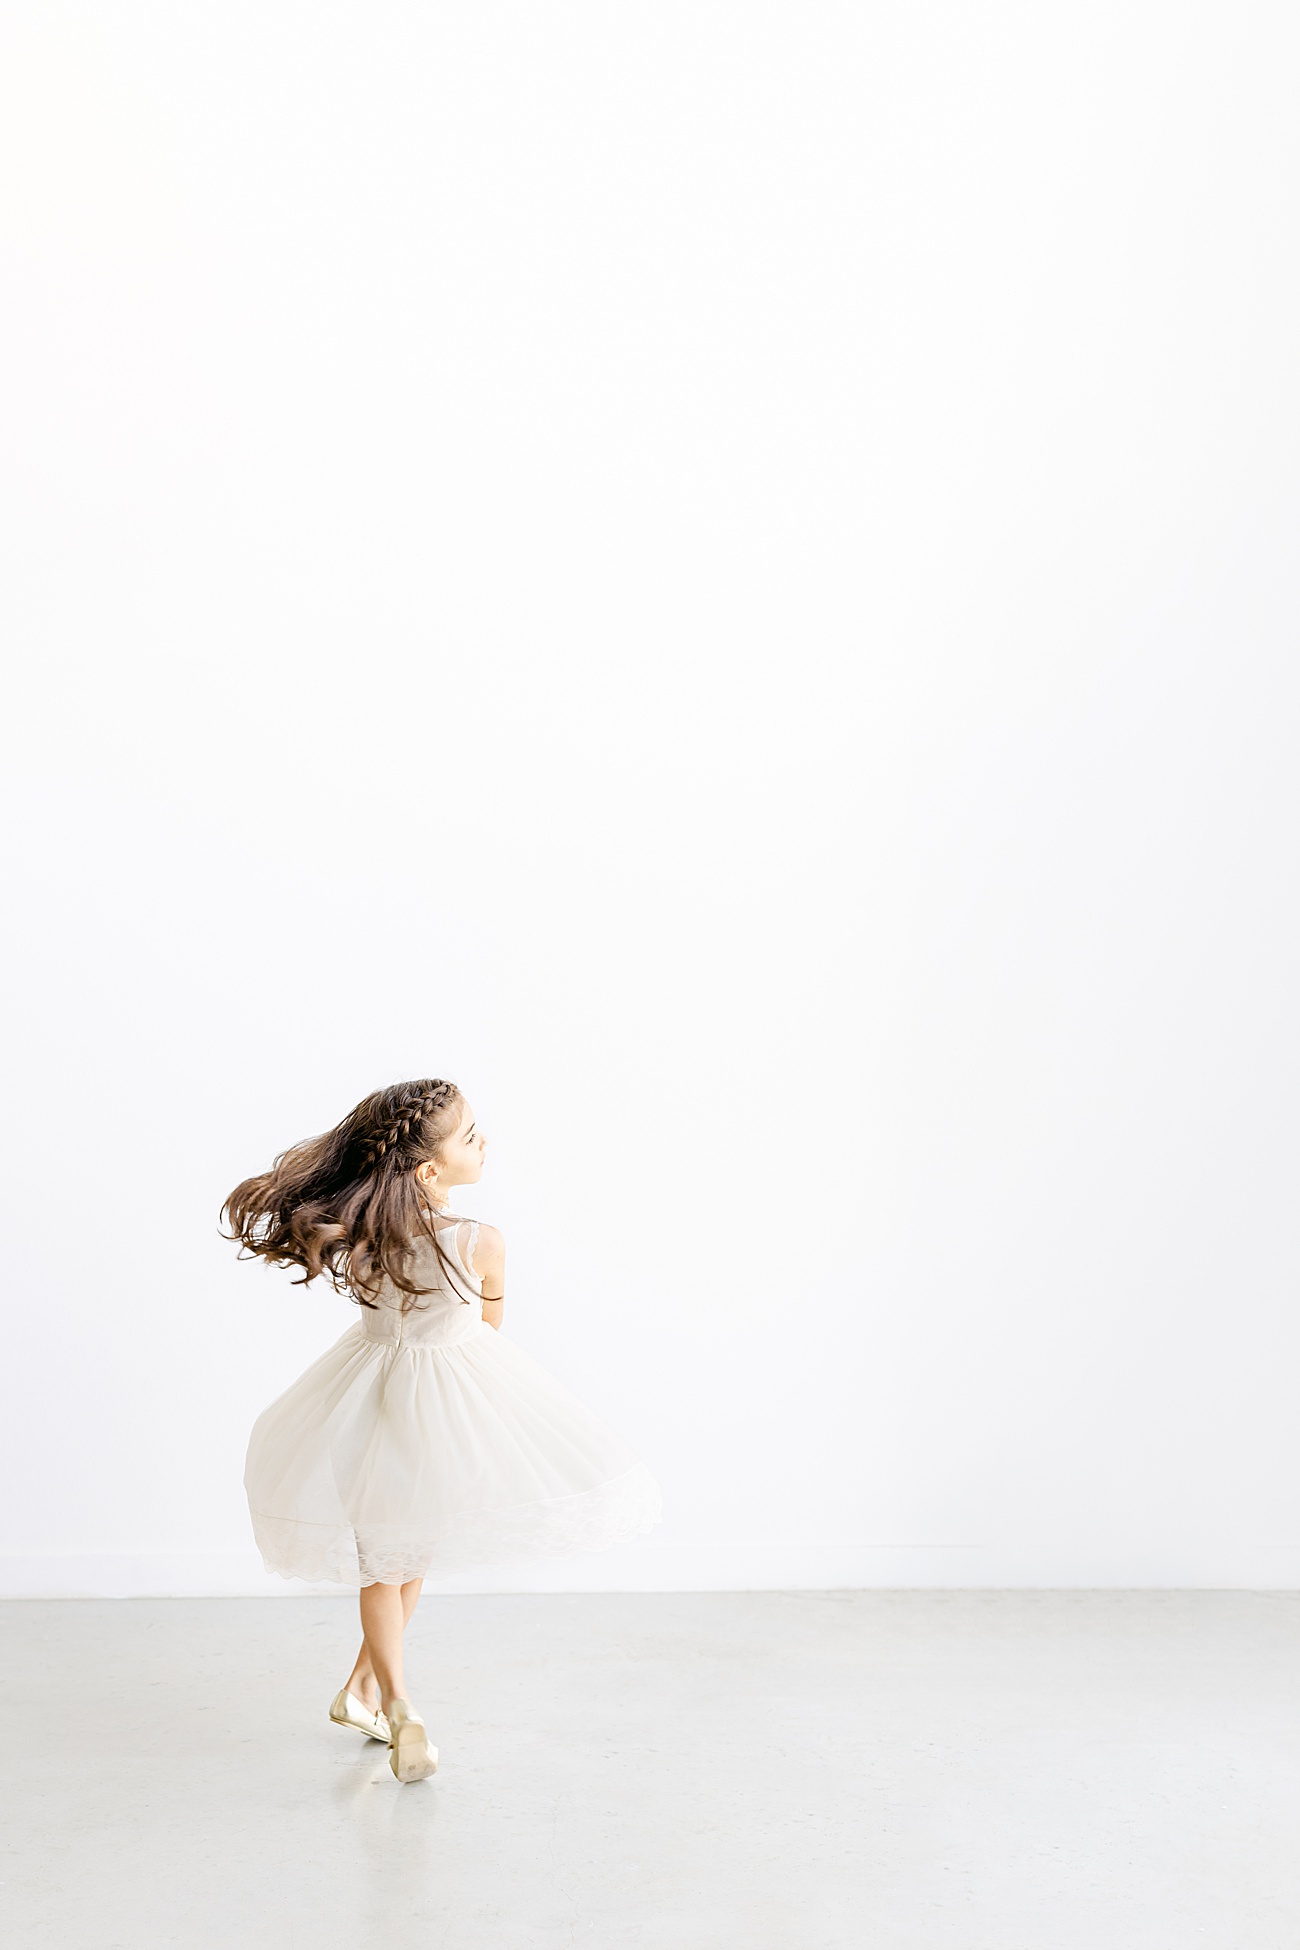 Little girl twirling during portrait session. Photo by Sana Ahmed Photography.